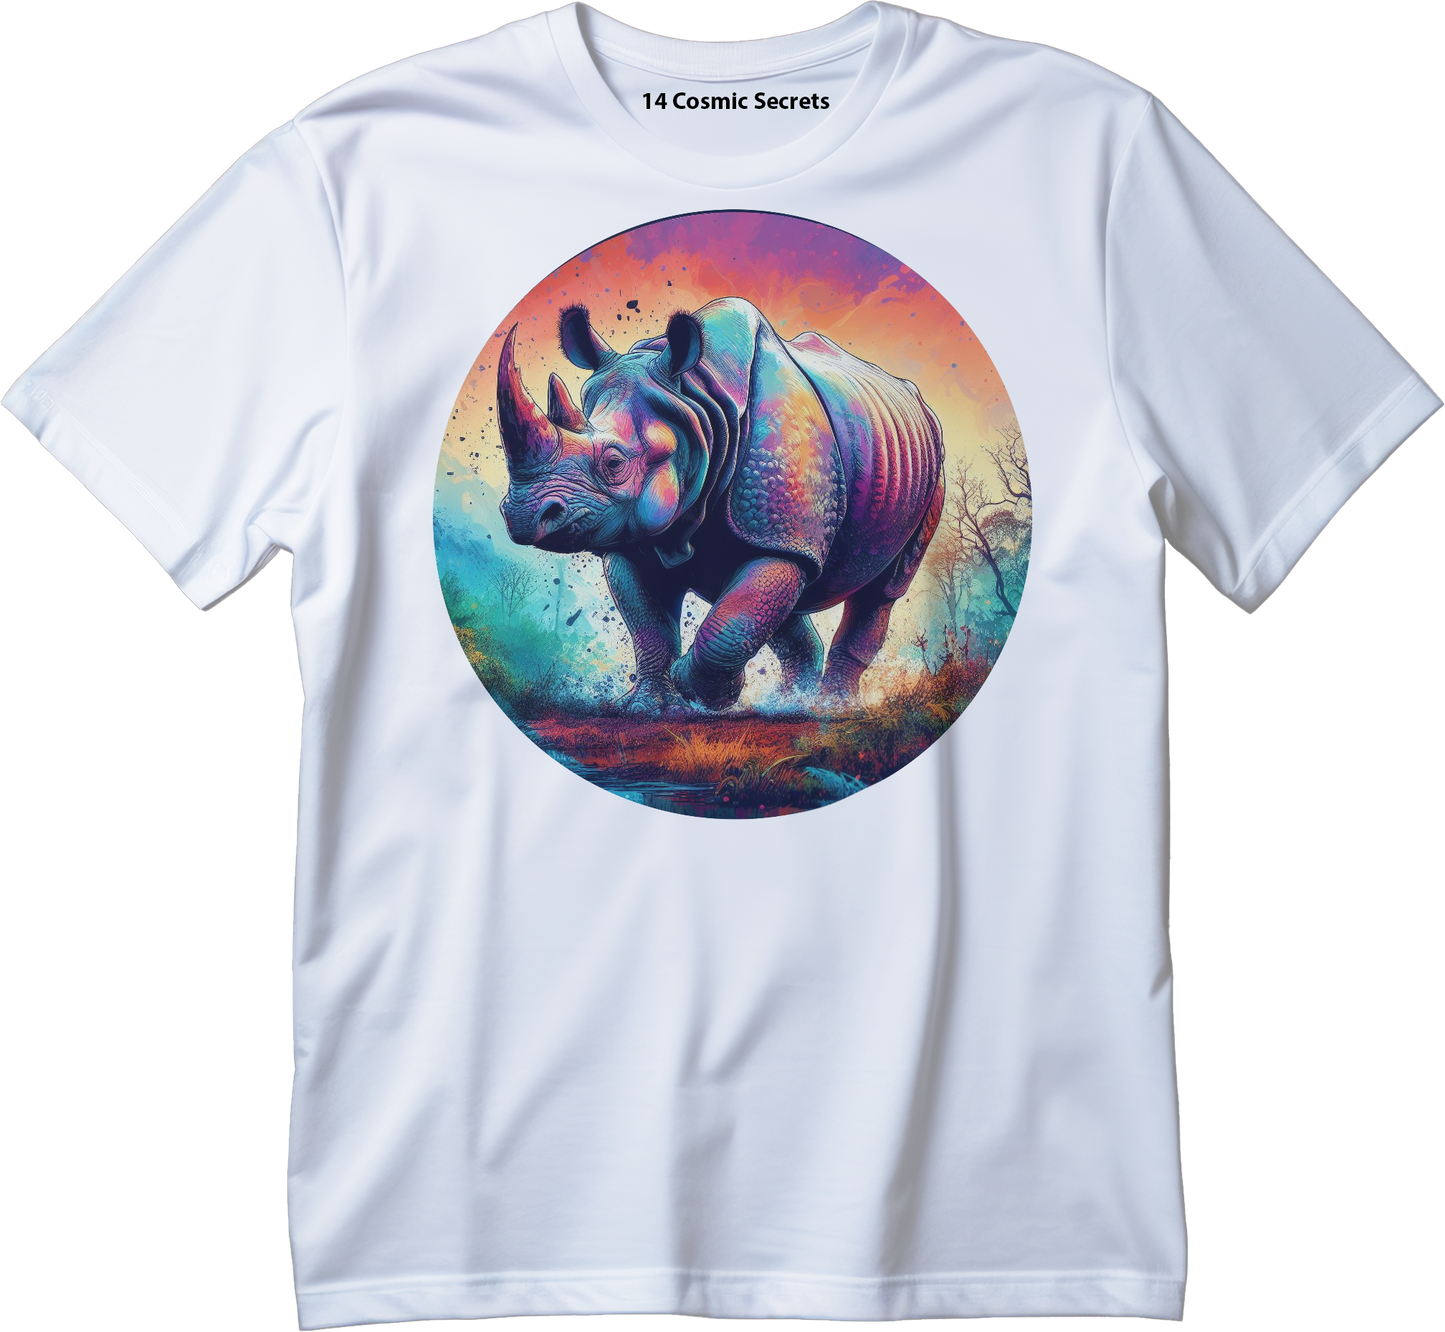 Born to Horn Graphic Printed T-Shirt  Cotton T-Shirt Magnificence of India T-Shirt